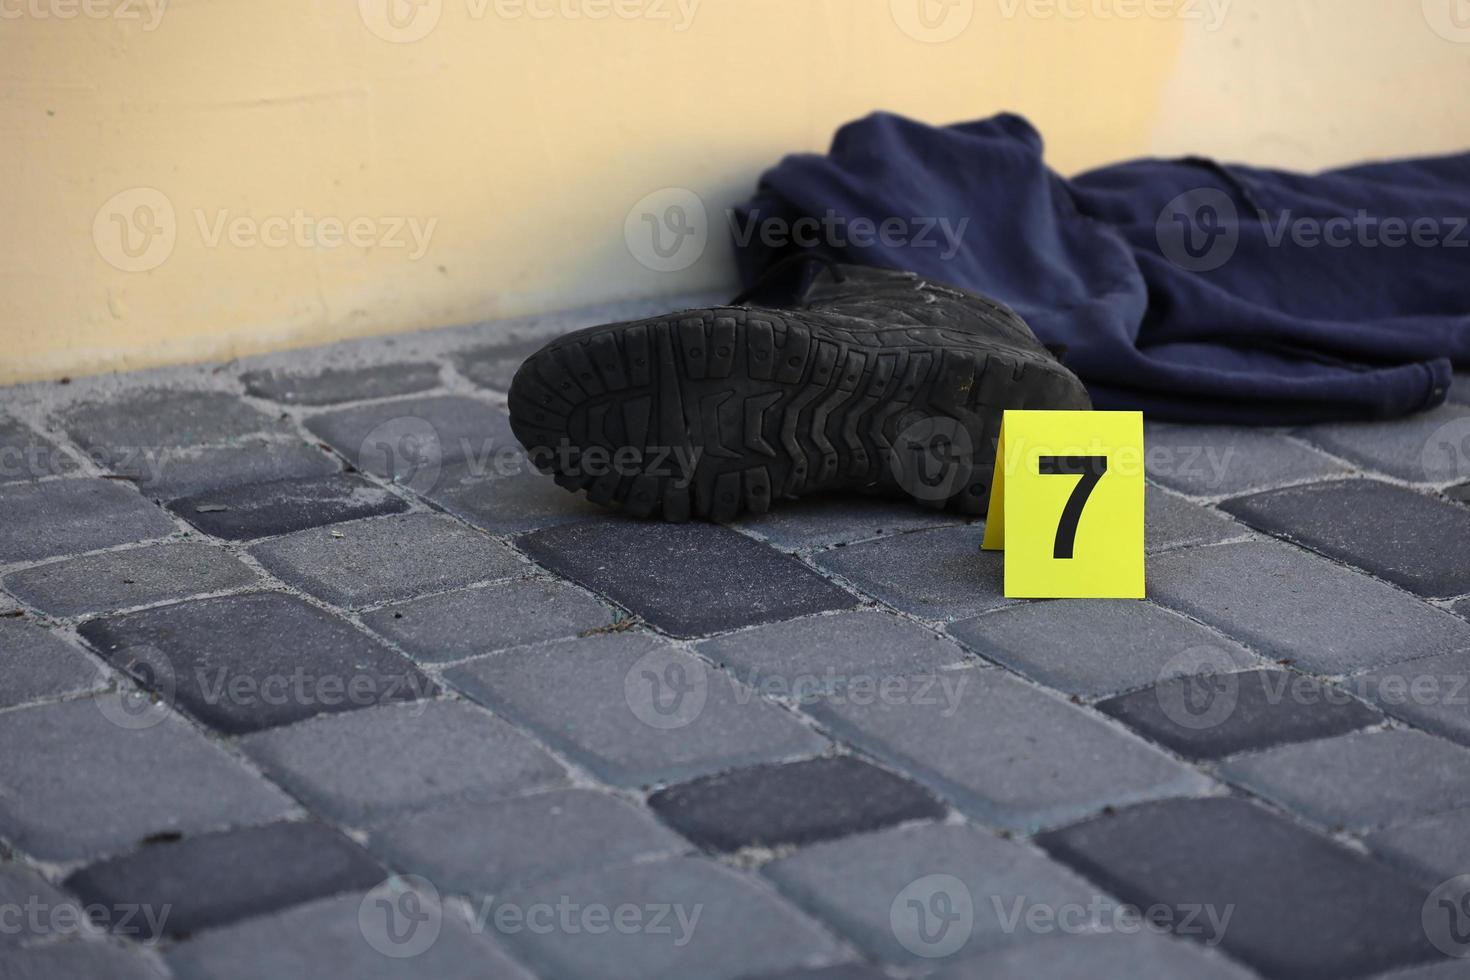 Evidence with yellow CSI marker for evidence numbering on the residental backyard in evening. Crime scene investigation concept photo